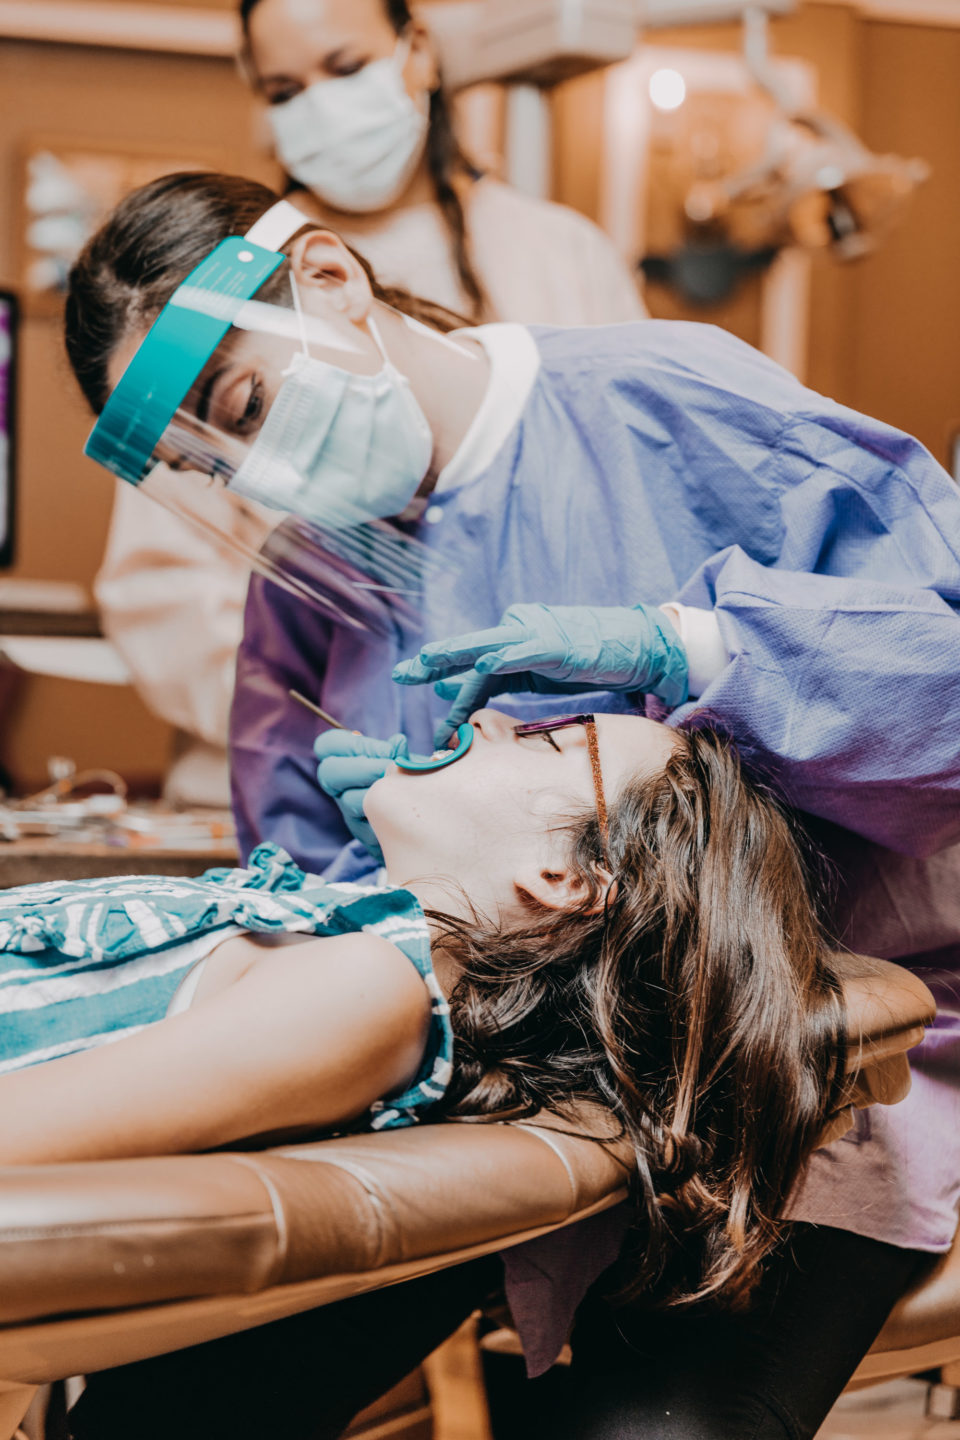 An orthodontist adjusts a young patient’s dental expander during an office visit.